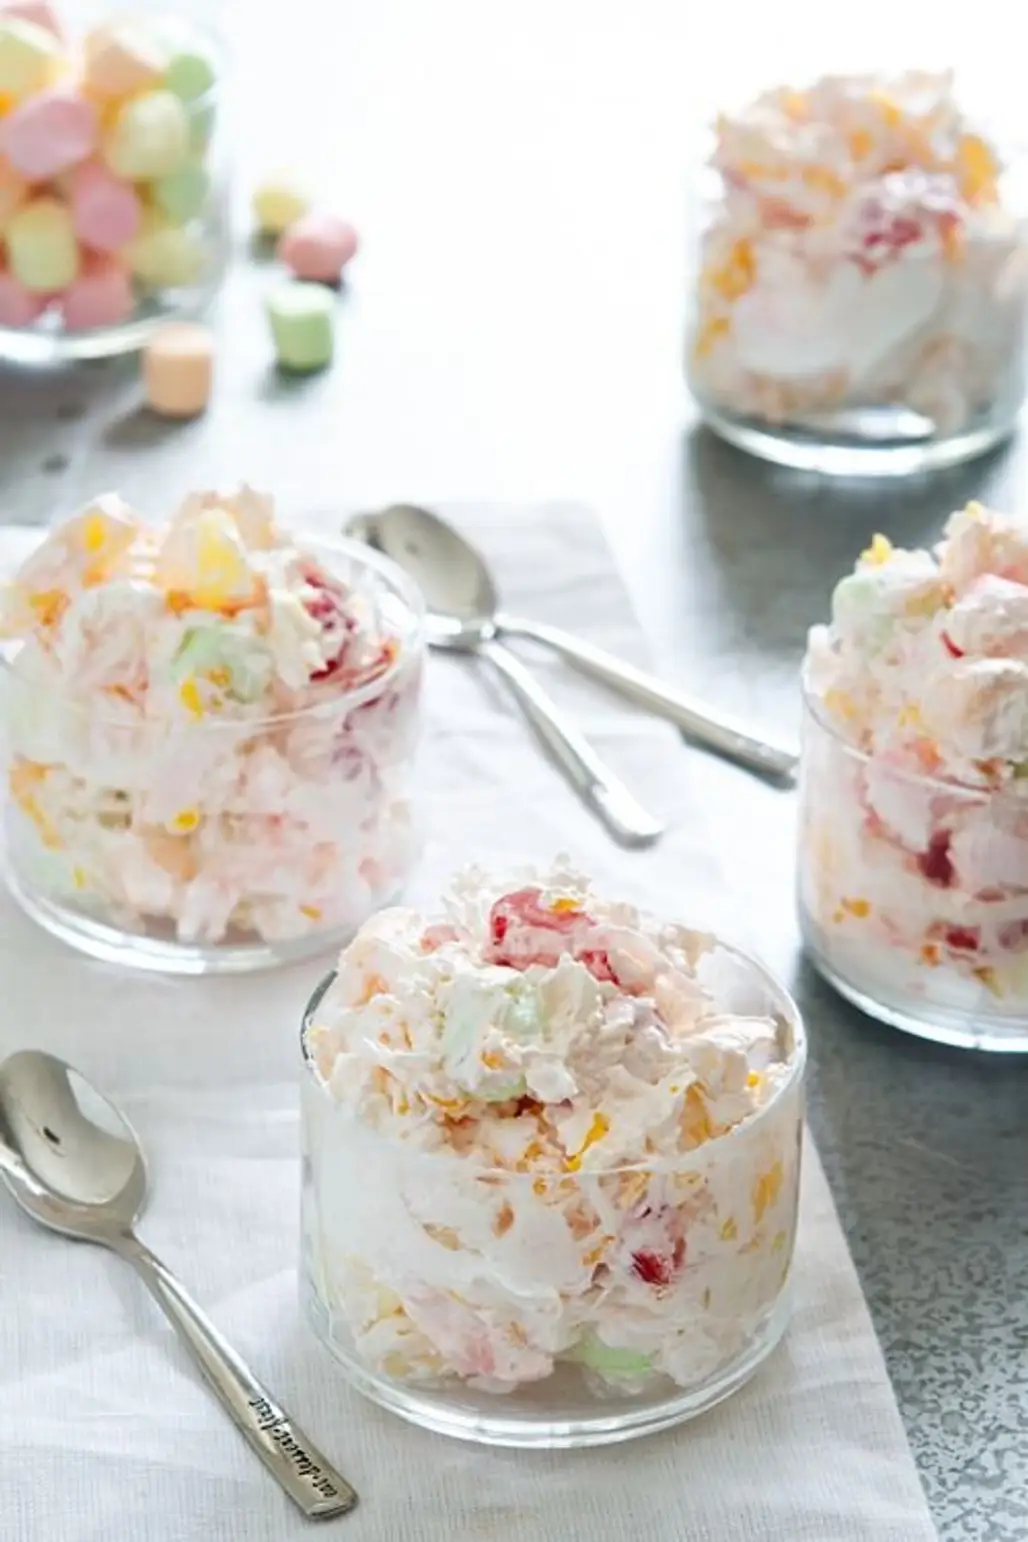 Oh the Fruity Goodness These 53 Desserts Feature Fruit... Yum